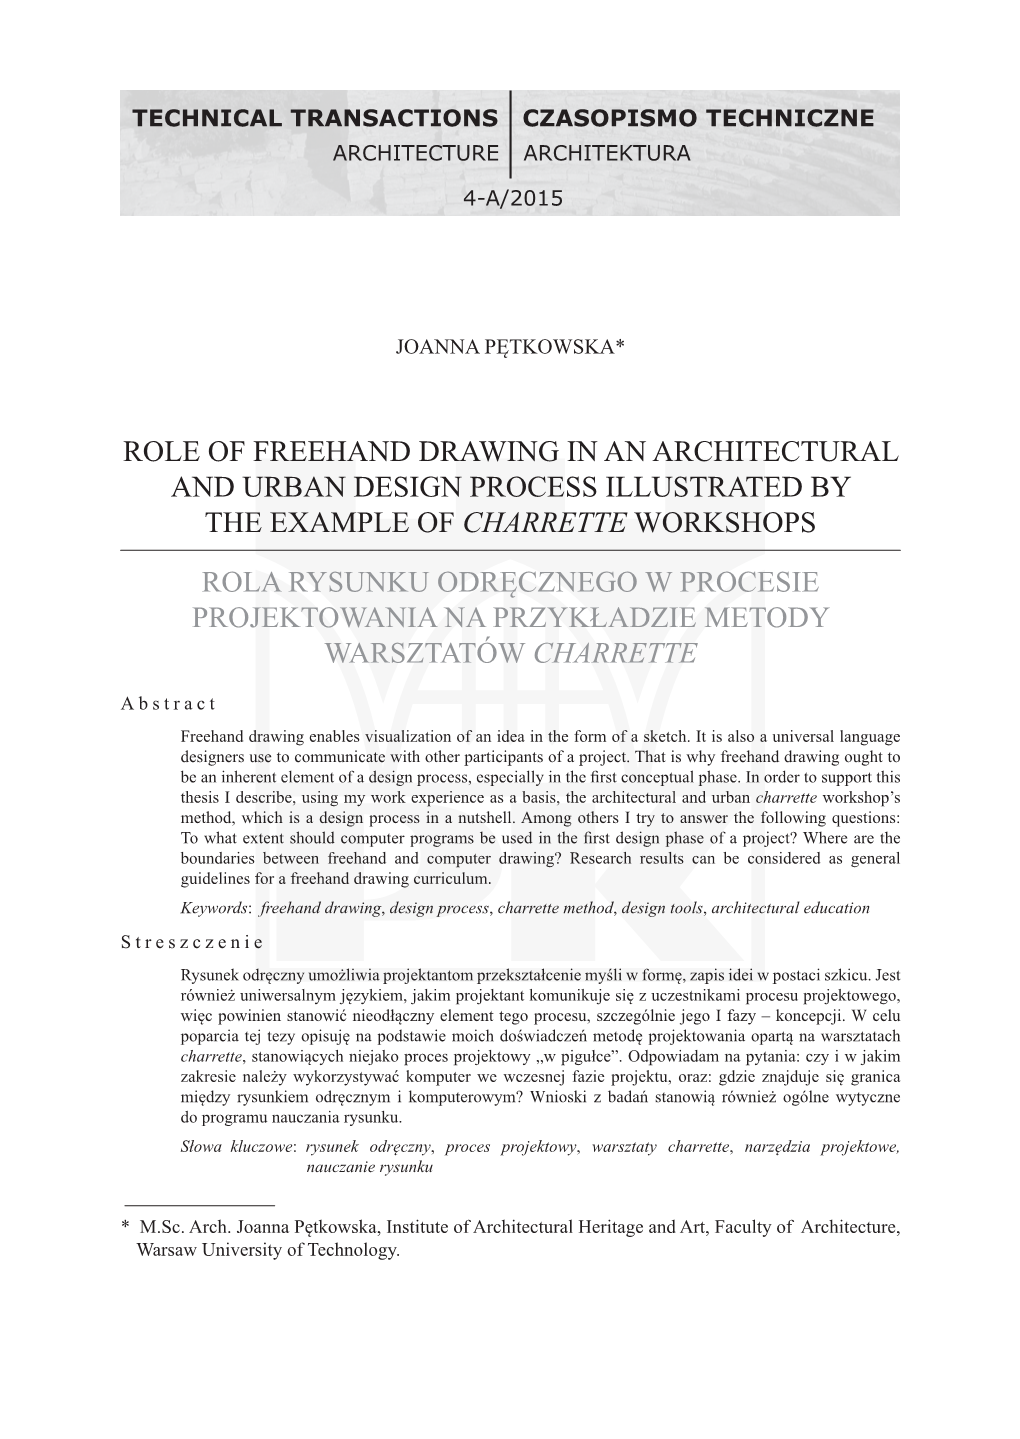 Role of Freehand Drawing in an Architectural and Urban Design Process Illustrated by the Example of Charrette Workshops